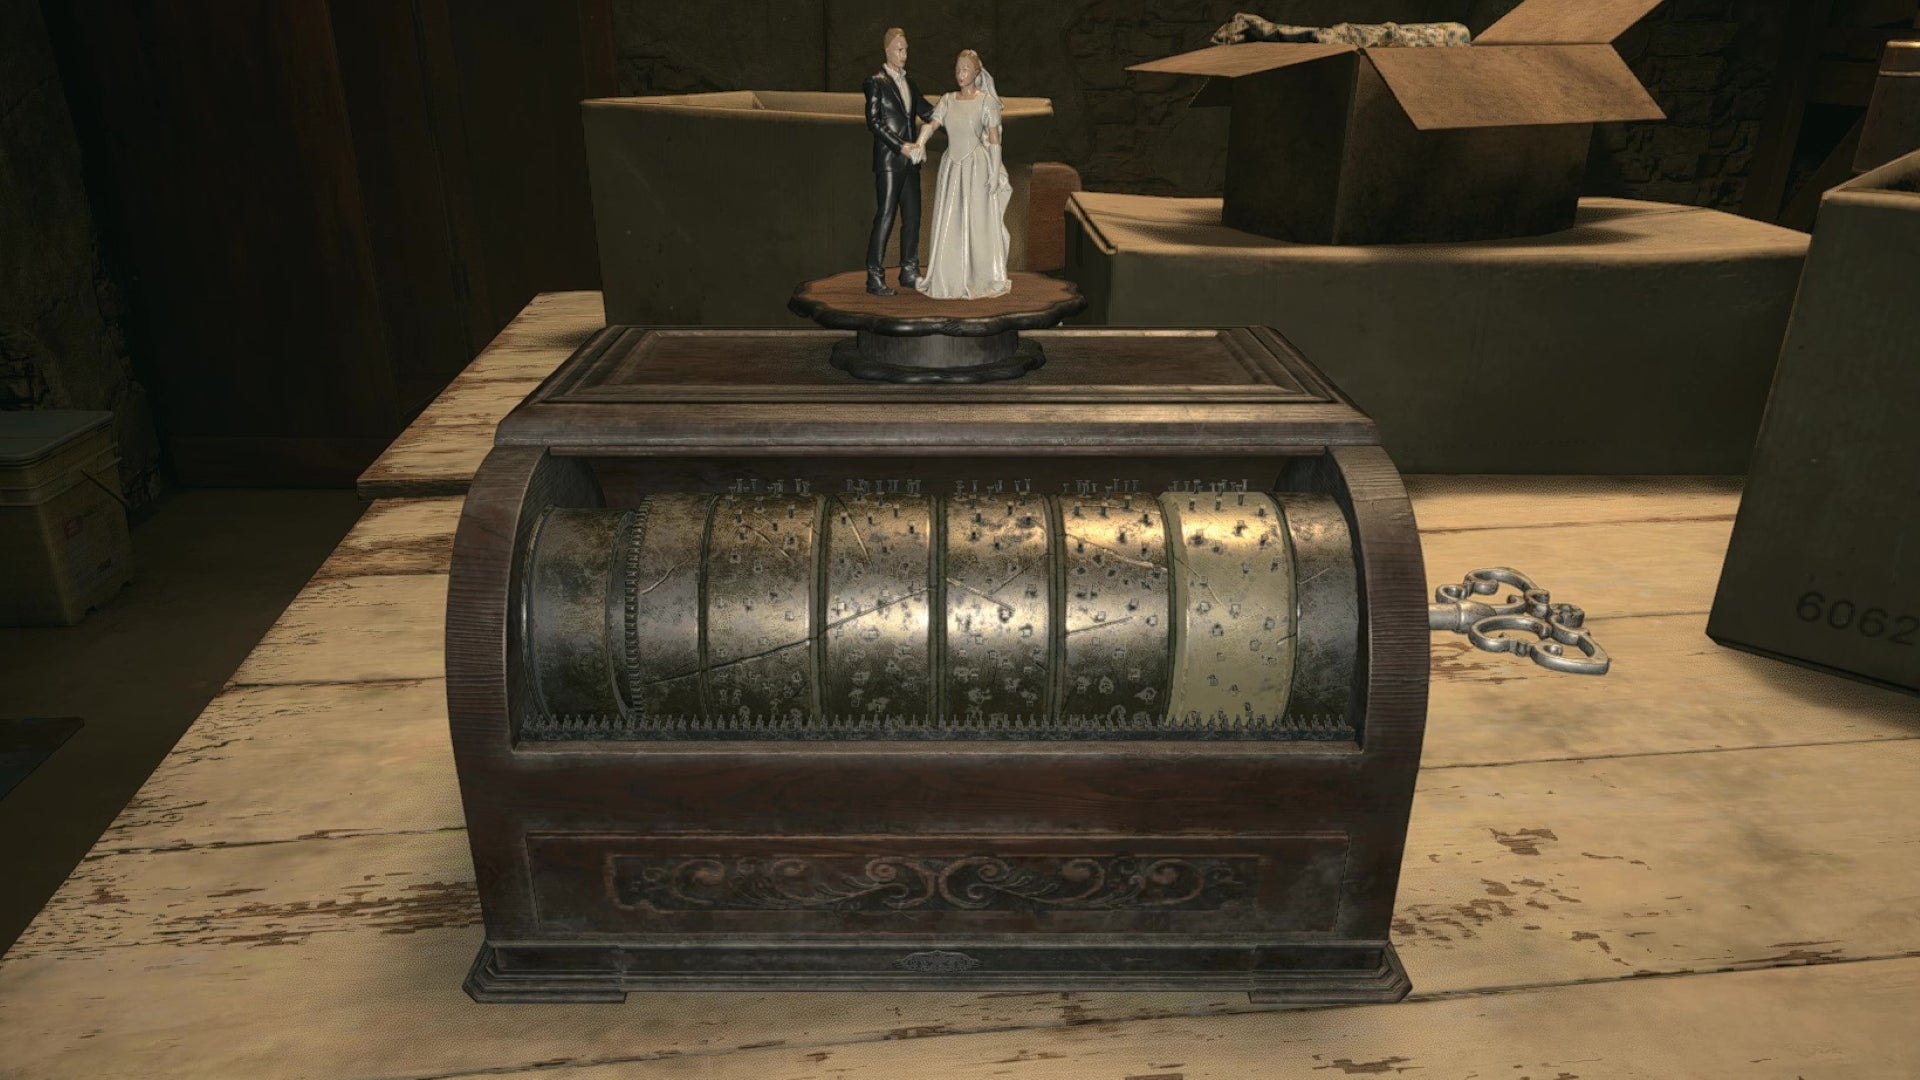 An image of the music box puzzle in Resident Evil Village.